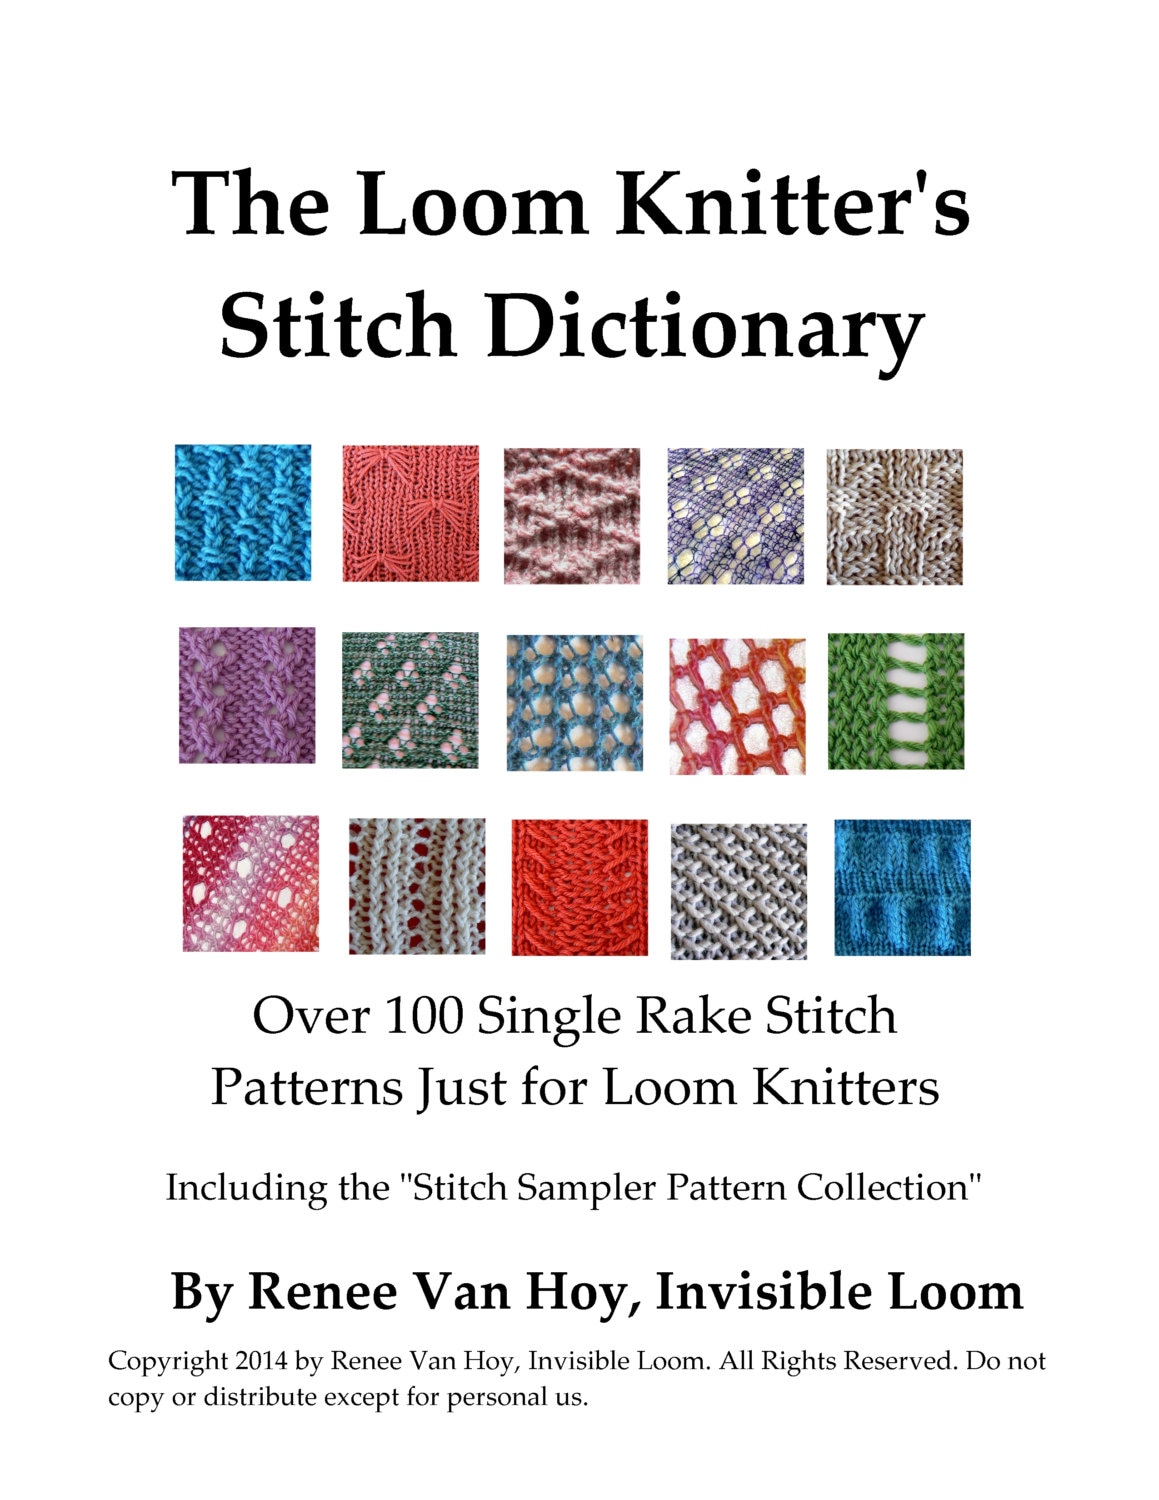 In the Attic Knitting Loom Round Loom Knitting Patterns spiral book